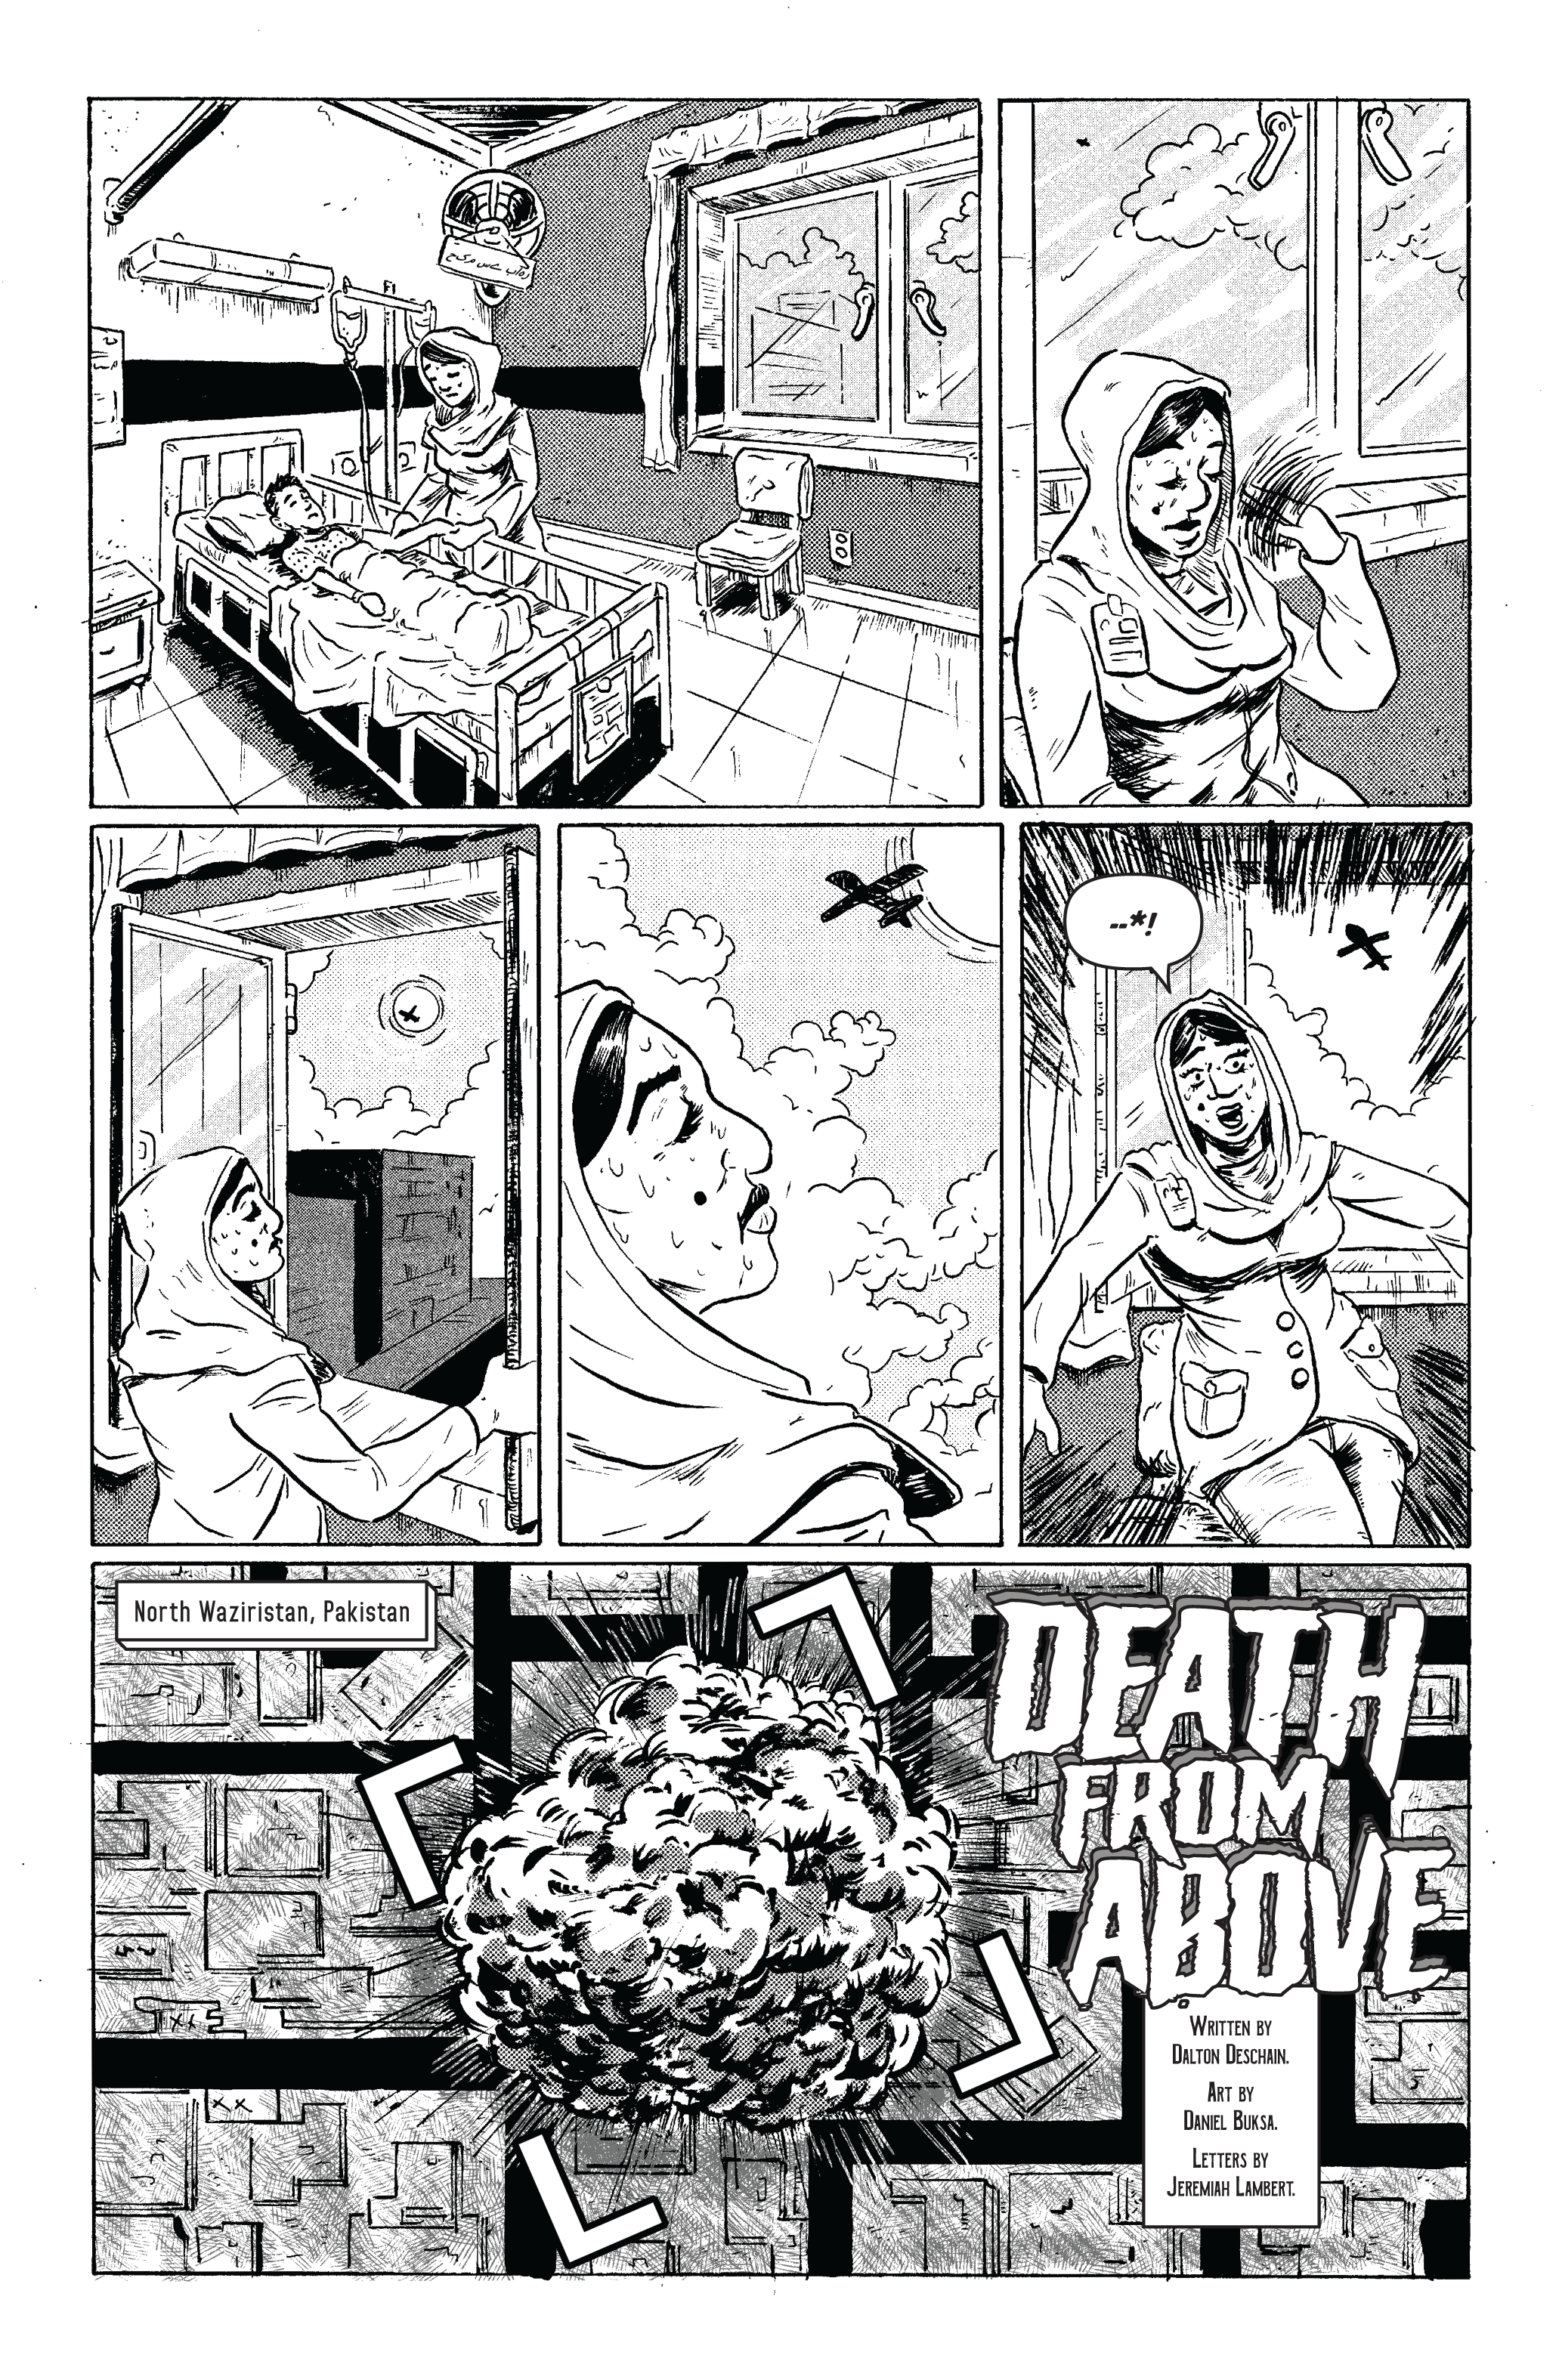 MONOCUL 02 pg 10 Death From Above pg 01-01.png